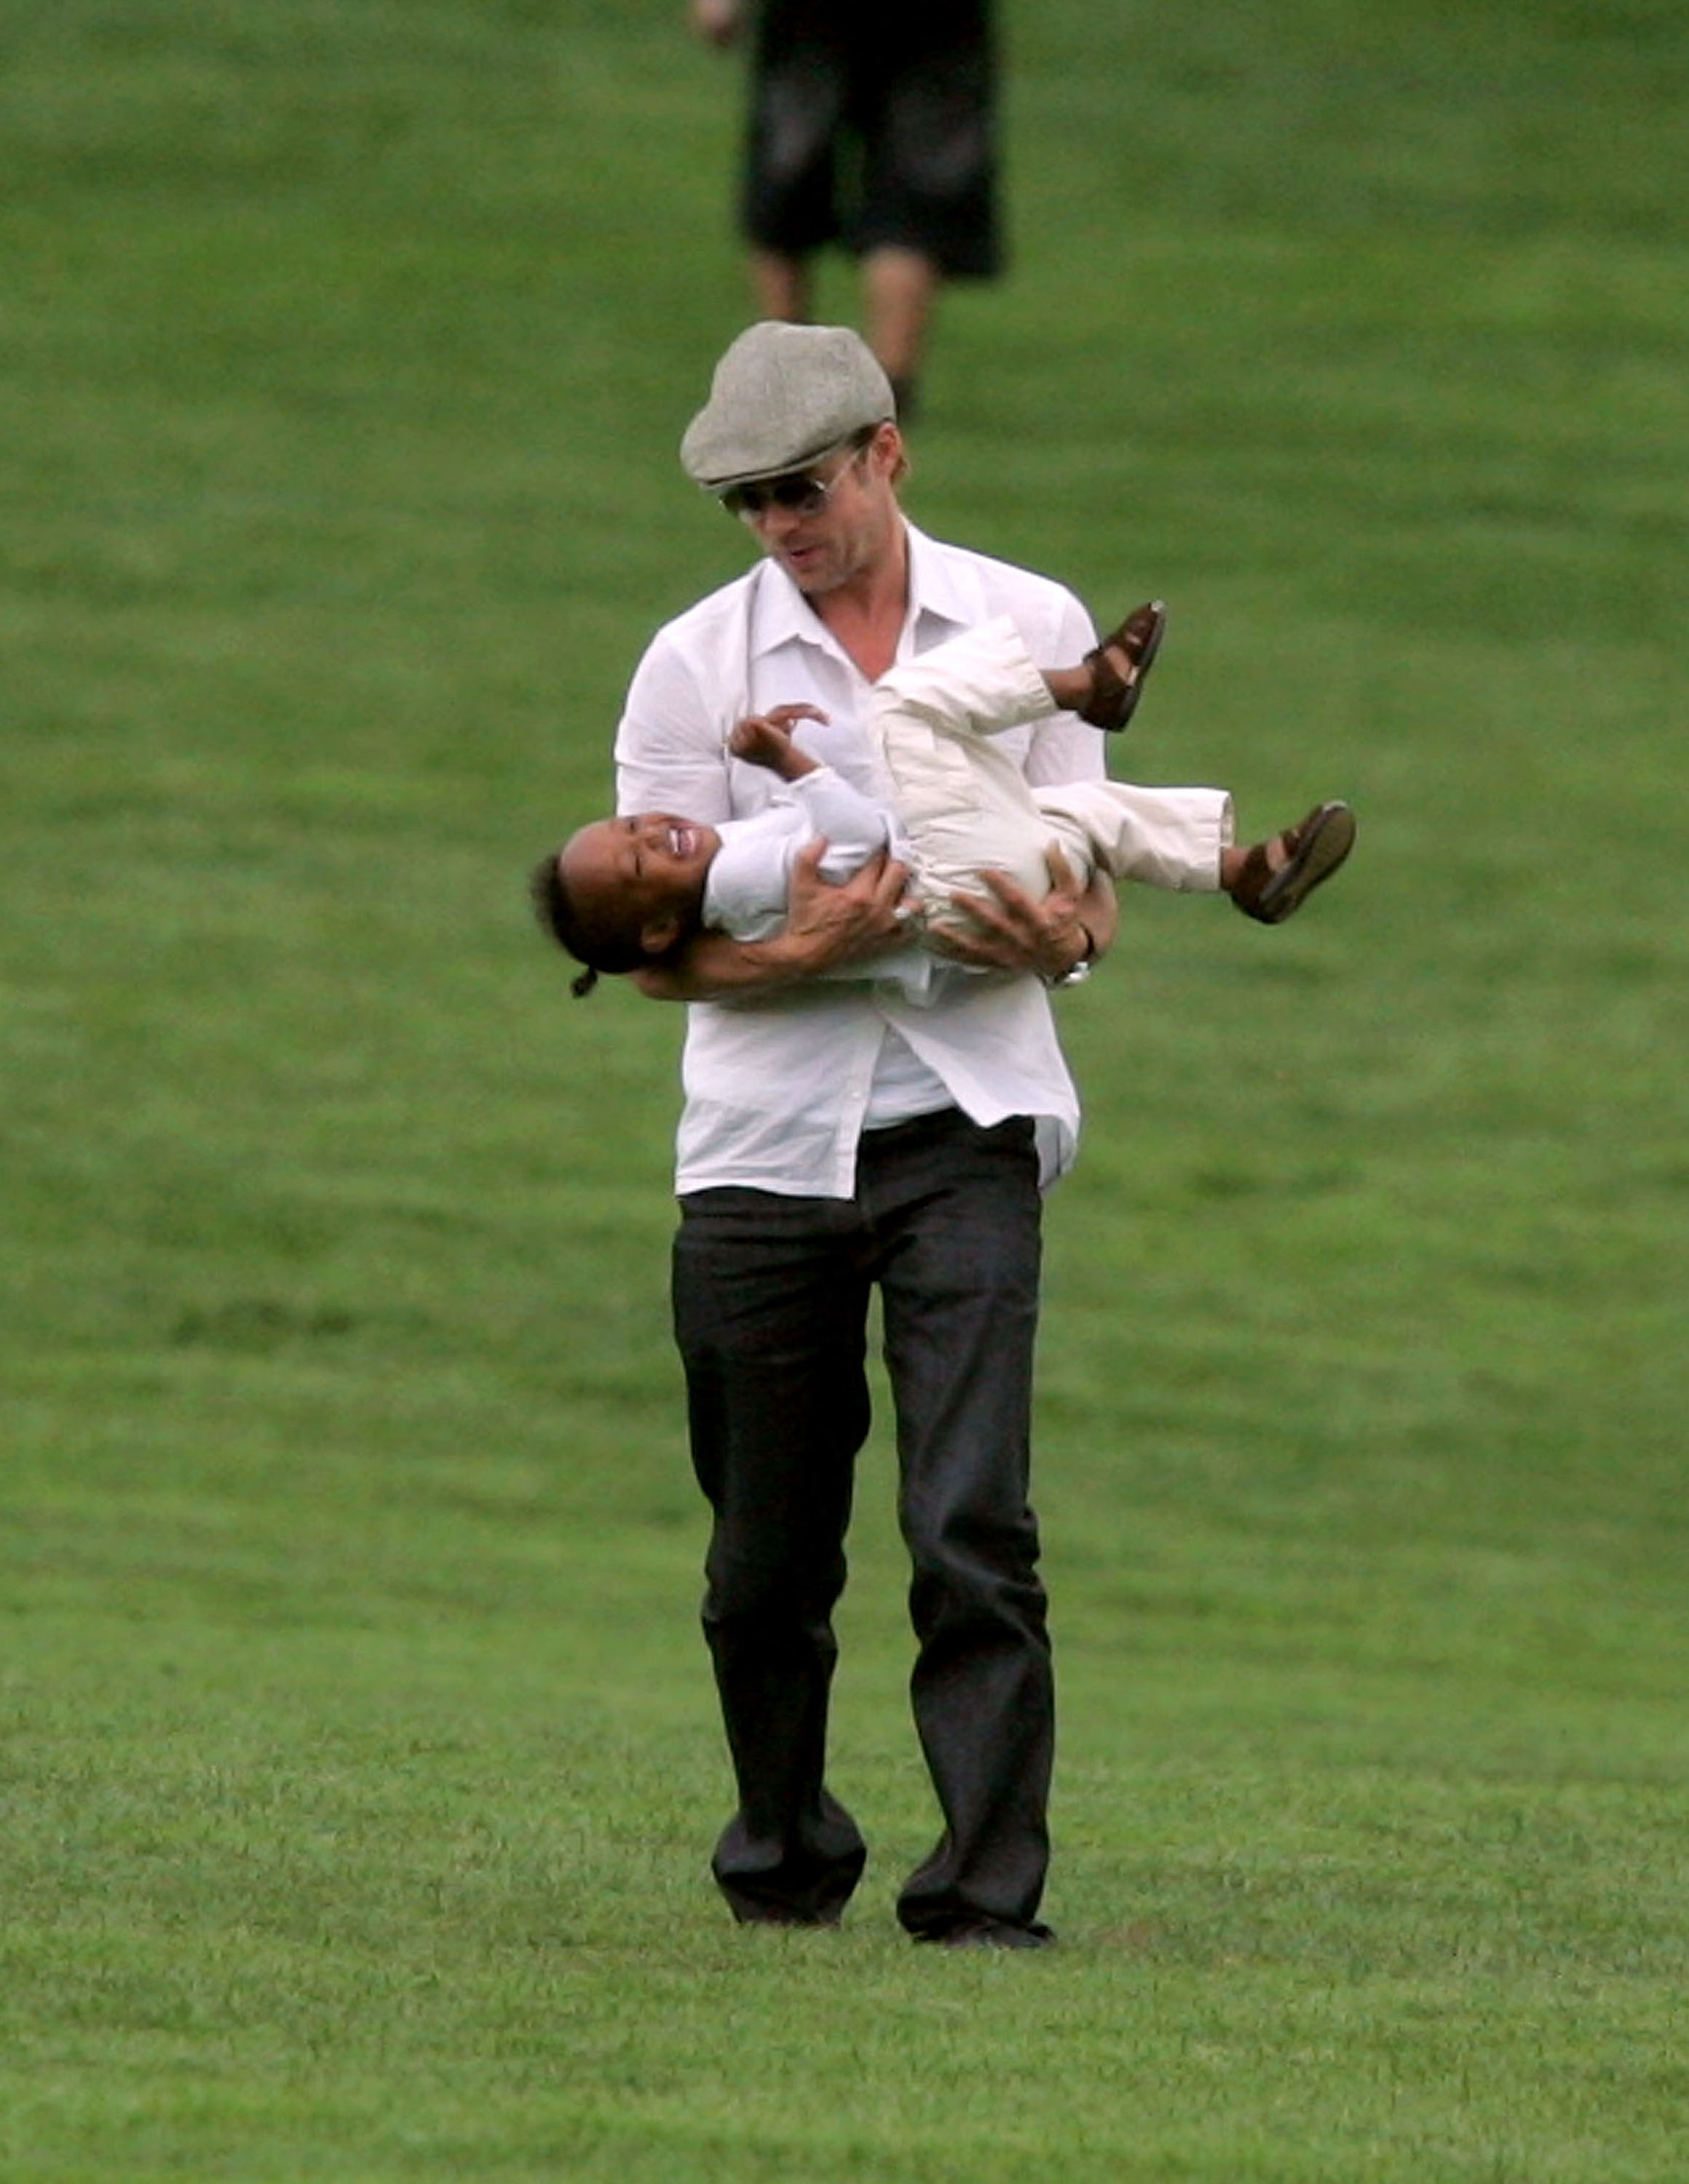 Brad Pitt and daughter Zahara at Central Park in New York City on August 28, 2007 | Source: Getty Images